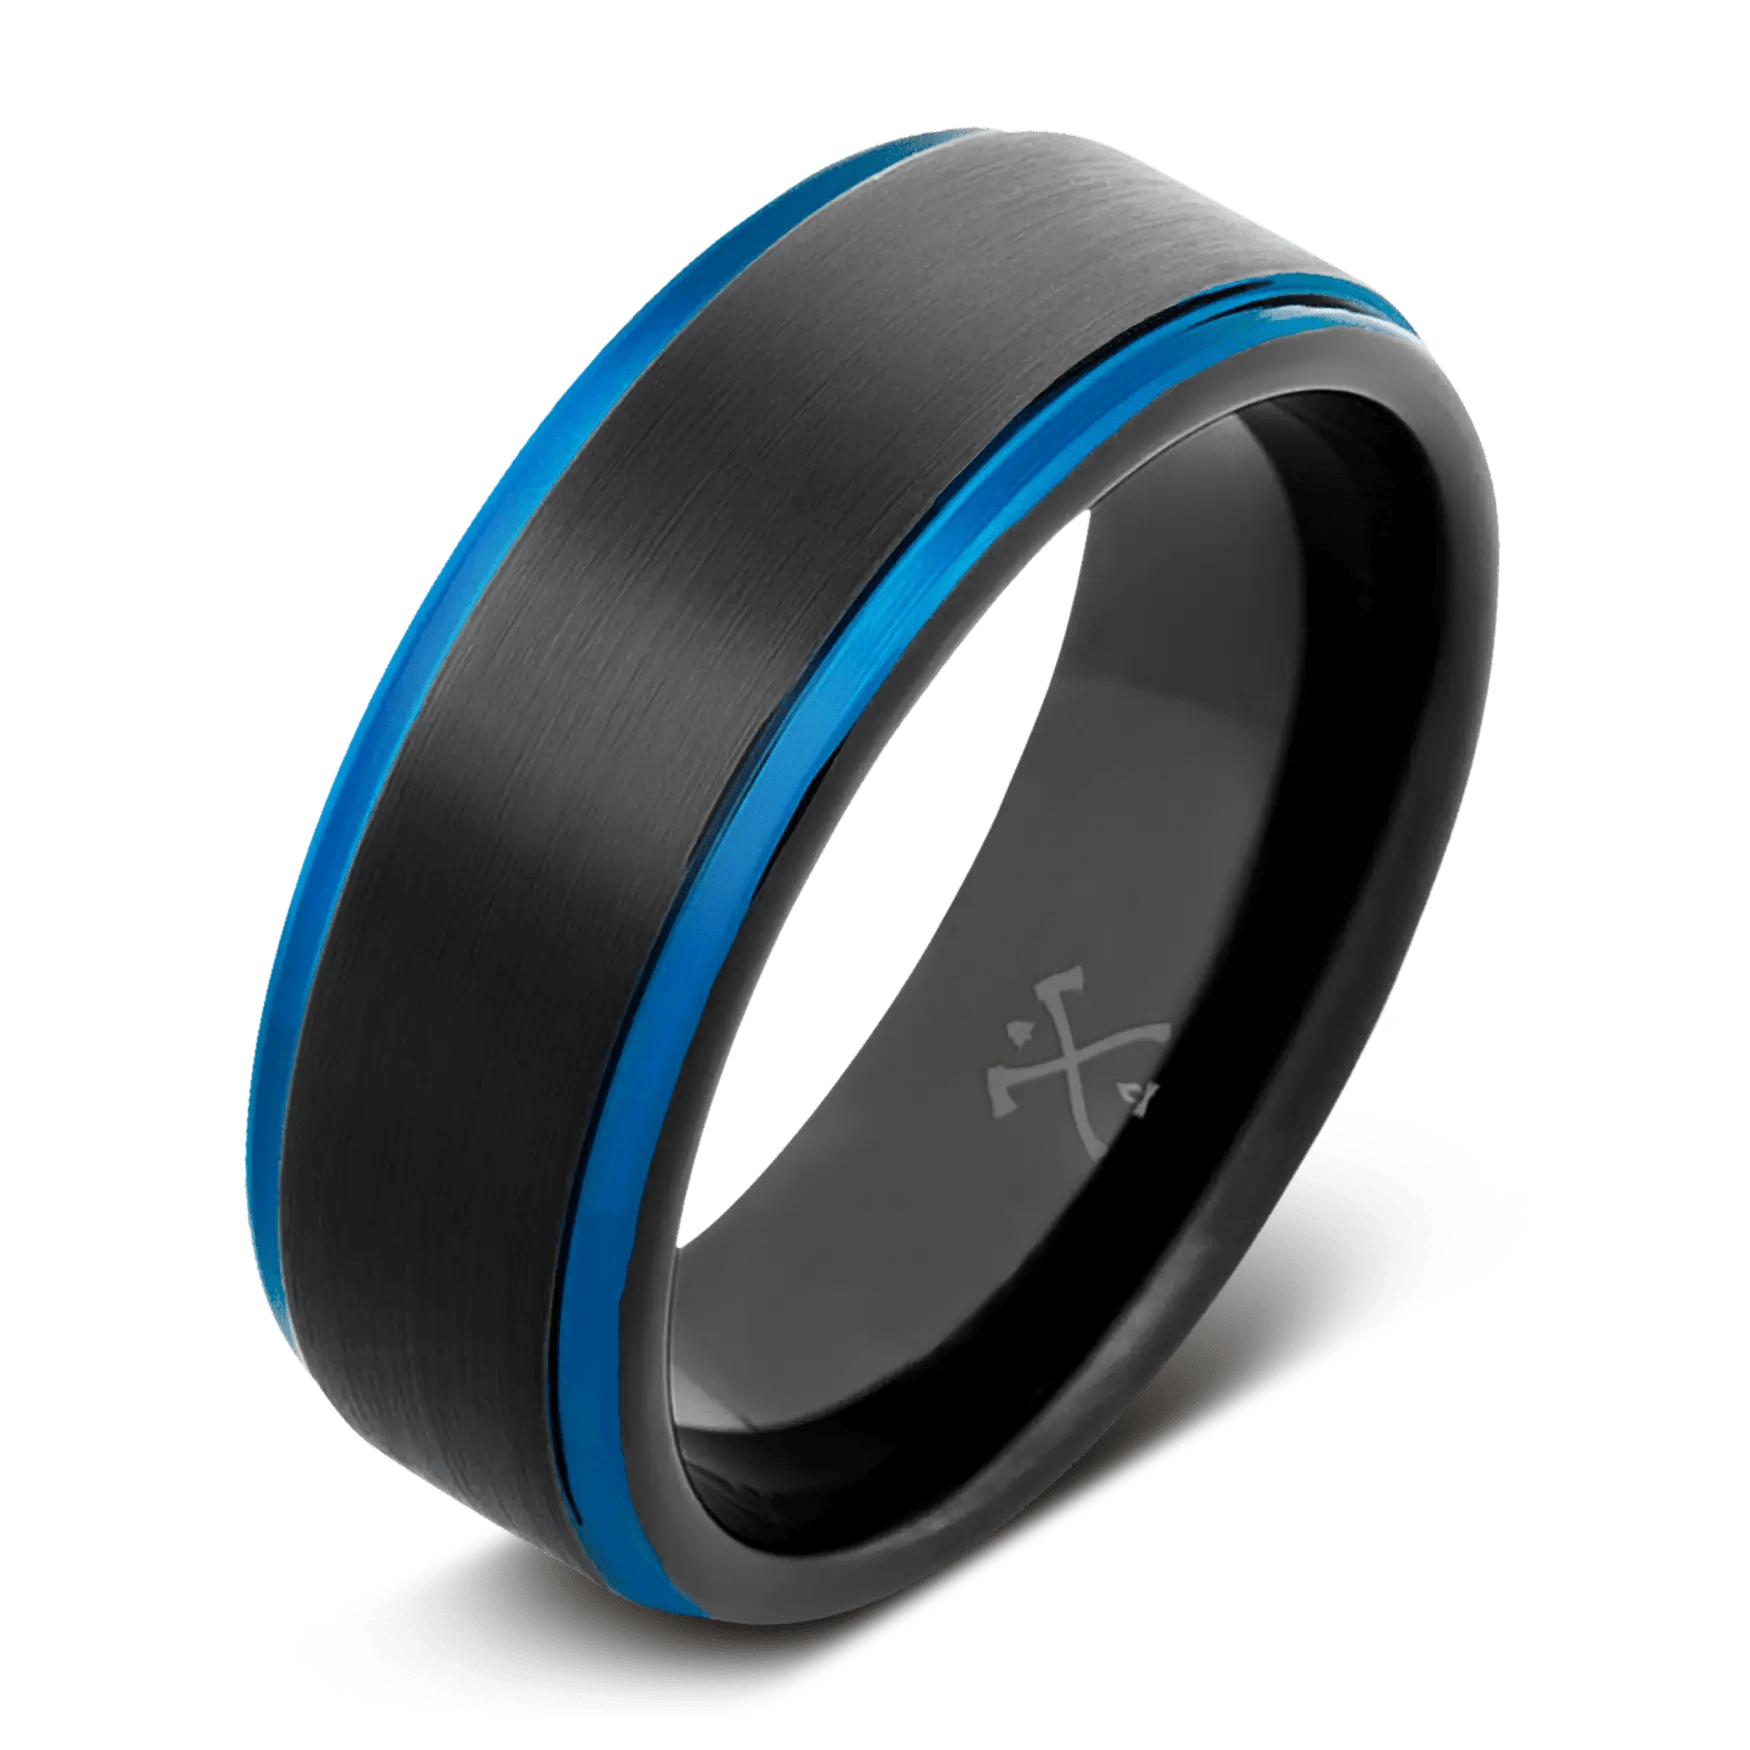 Manly Bands | The DJ | Black Plated Tungsten with Blue Plating Men's Wedding Band: 8mm, Flat Stepped Edge, Comfort Fit, Black, Heavyweight & Wide